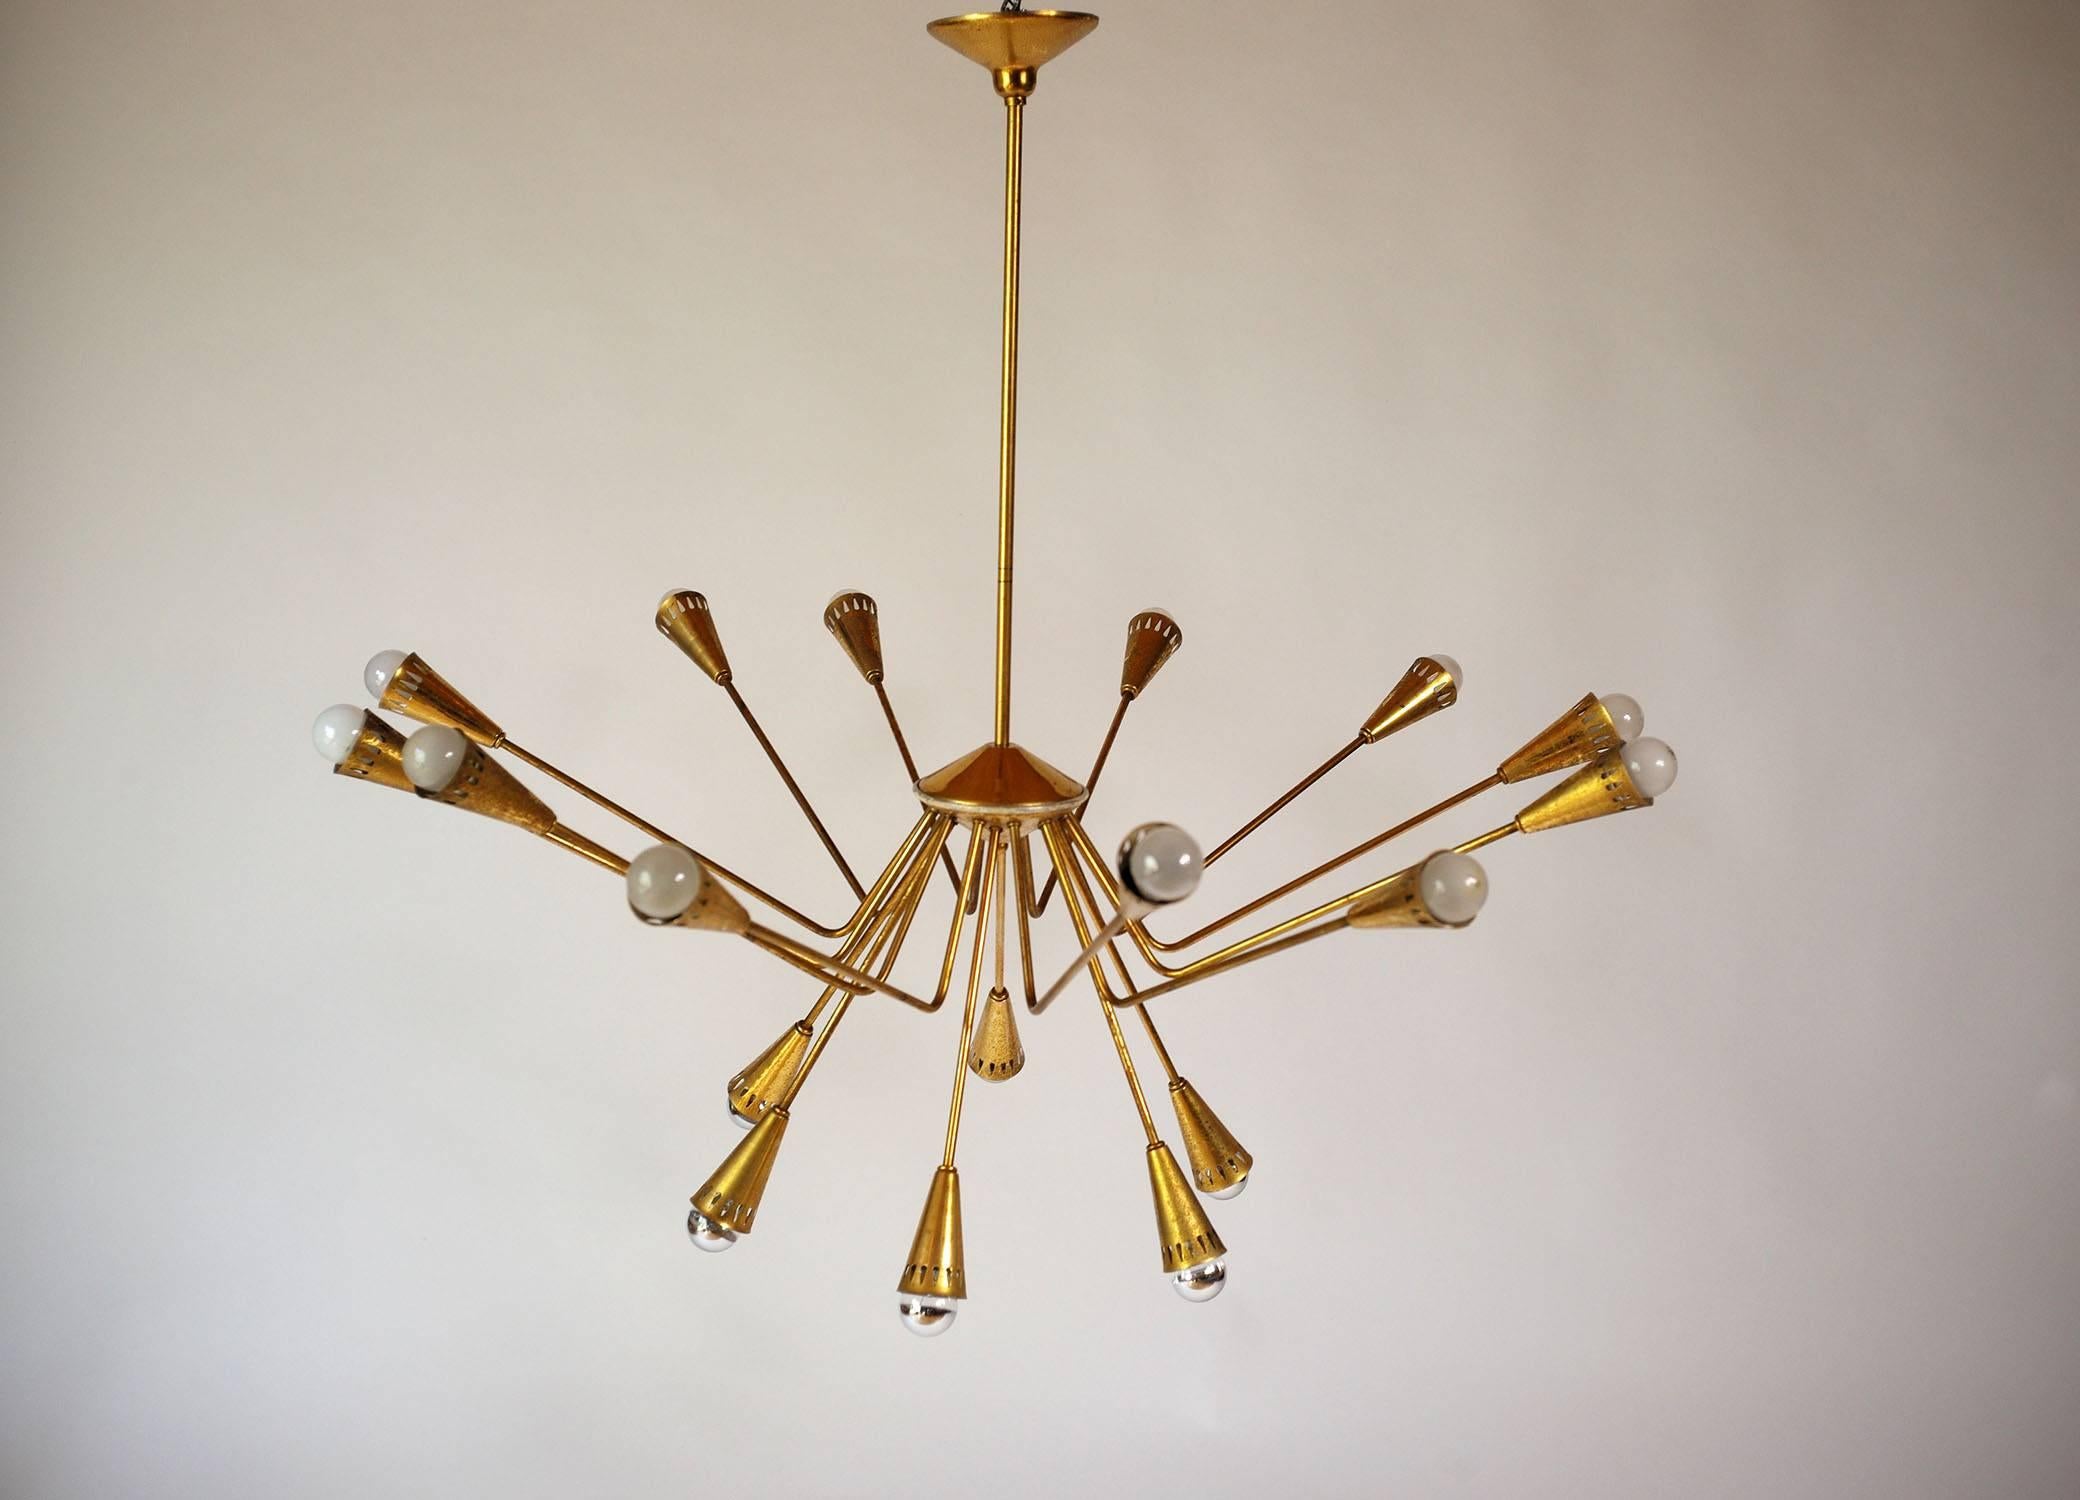 Rare golden brass eighteen-light chandelier by Oscar Torlasco for Lumi, Italy, 1950. Perforated bulb covers in drops of water.
Beautiful state of origin, electricity restored to norms.